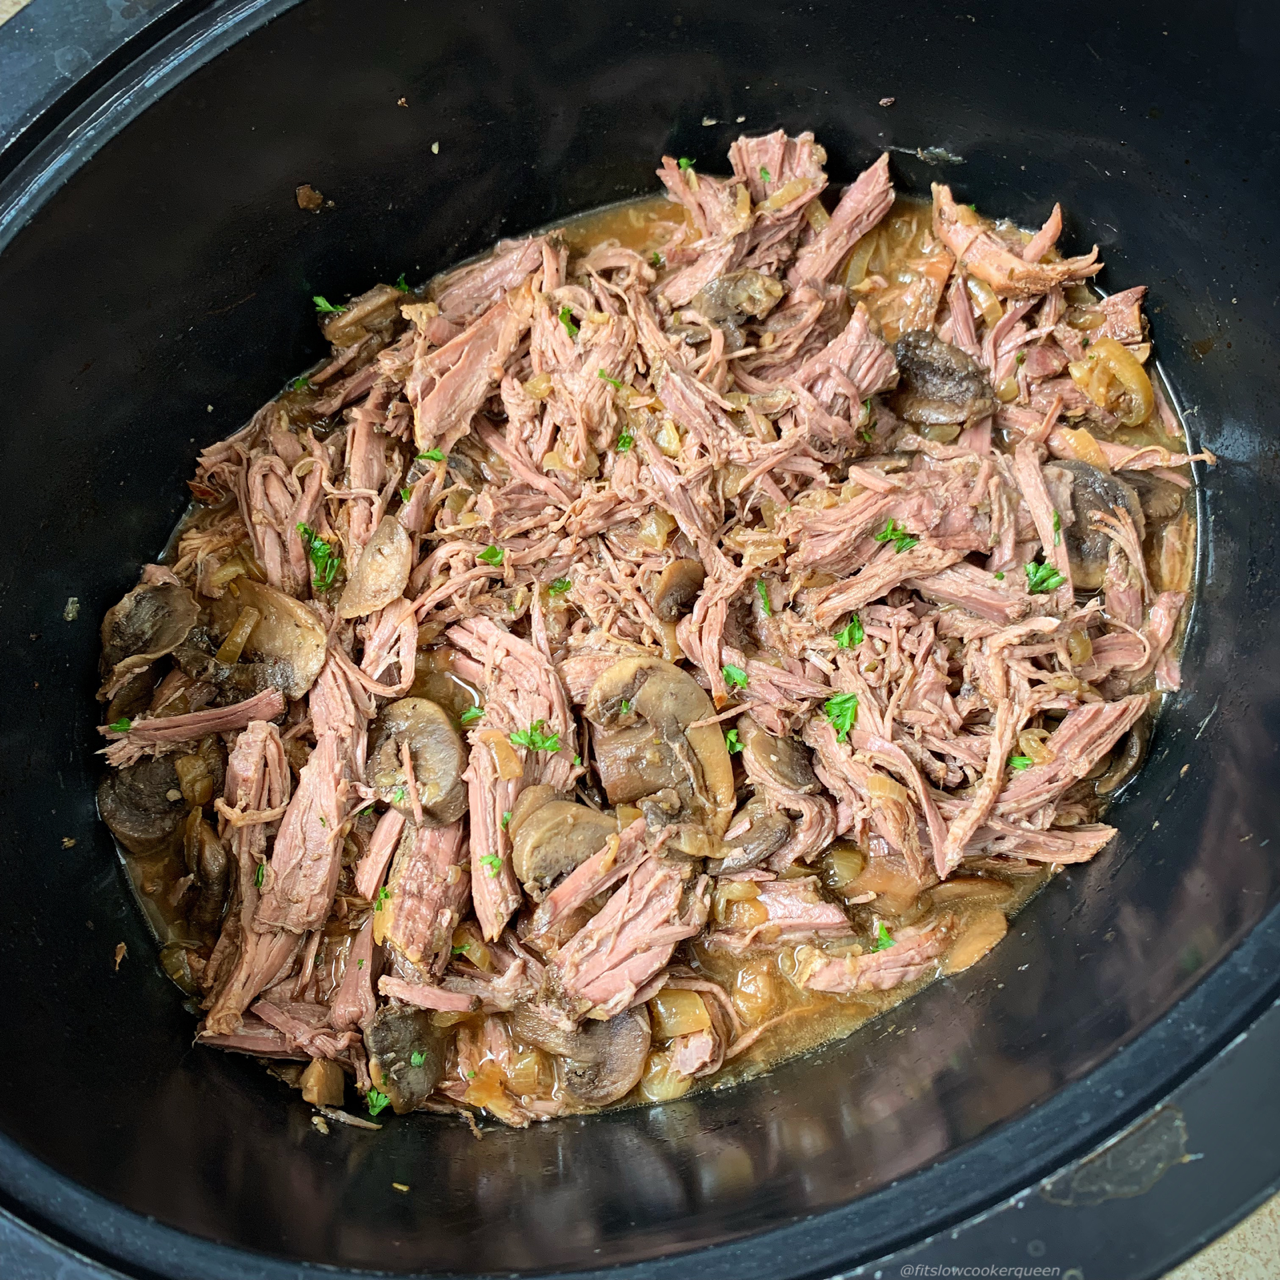 Beef slow cooks with mushrooms for a healthy meal the entire family will enjoy. Make this paleo, whole30, low-carb roast in your slow cooker or Instant Pot!